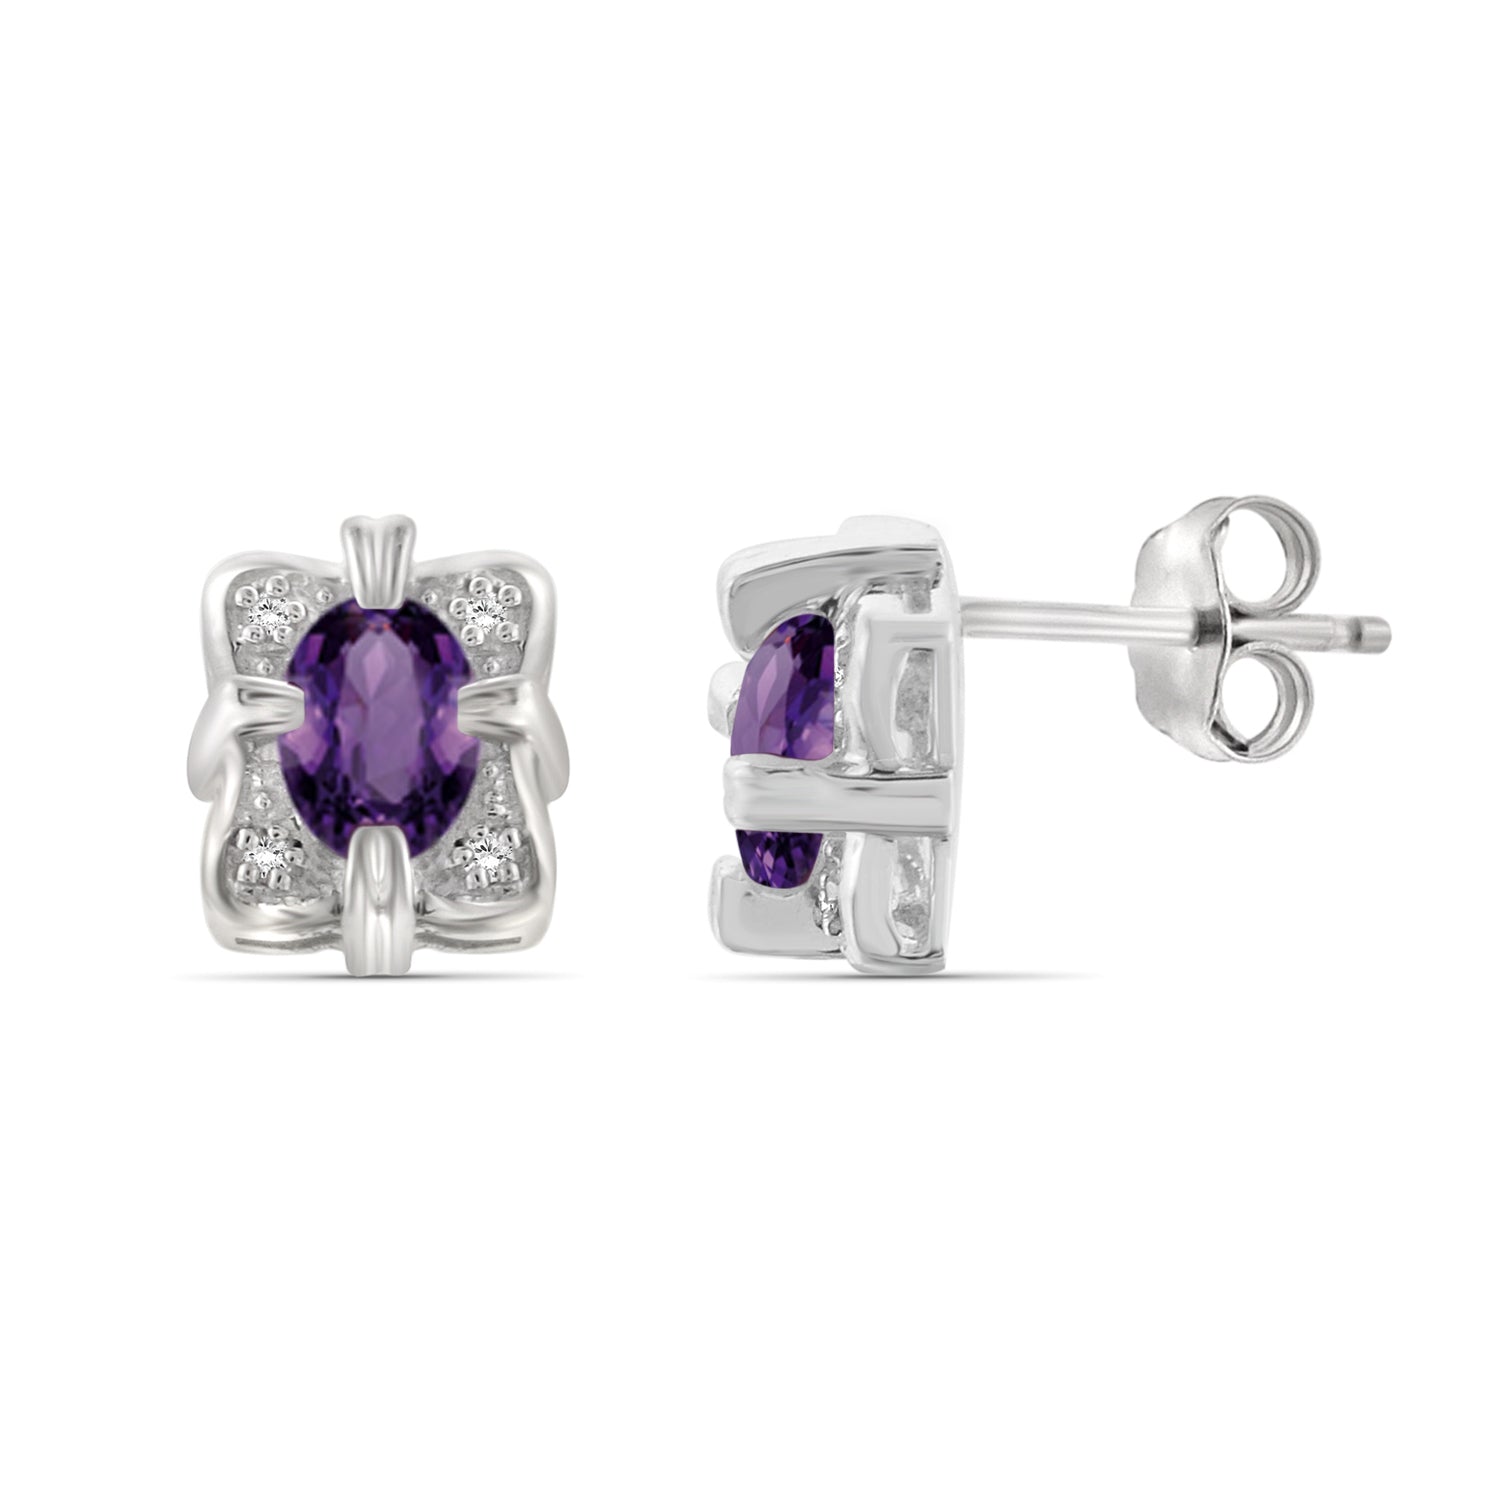 0.84 Carat T.G.W. Amethyst Gemstone and White Diamond Accent Sterling Silver Earrings